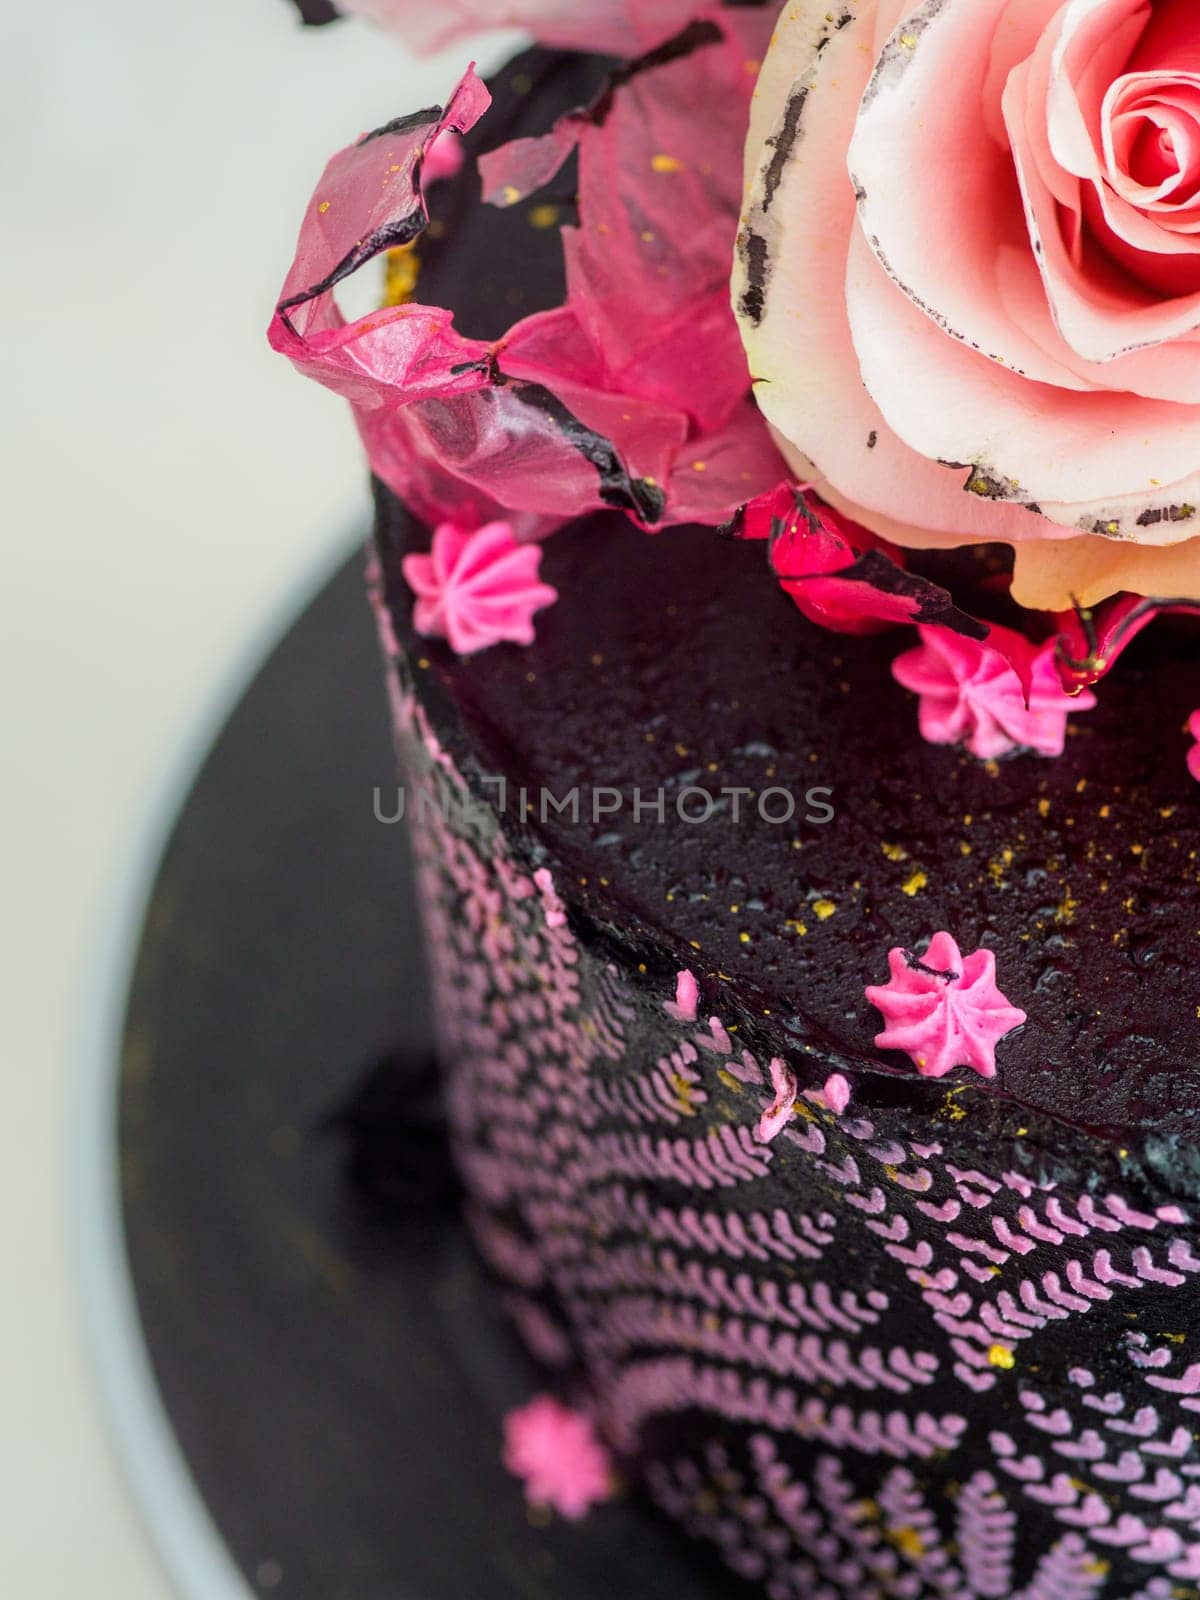 frosted icing black decorate cake for birthday celebration, real rose topping and pink sweet swirls by verbano